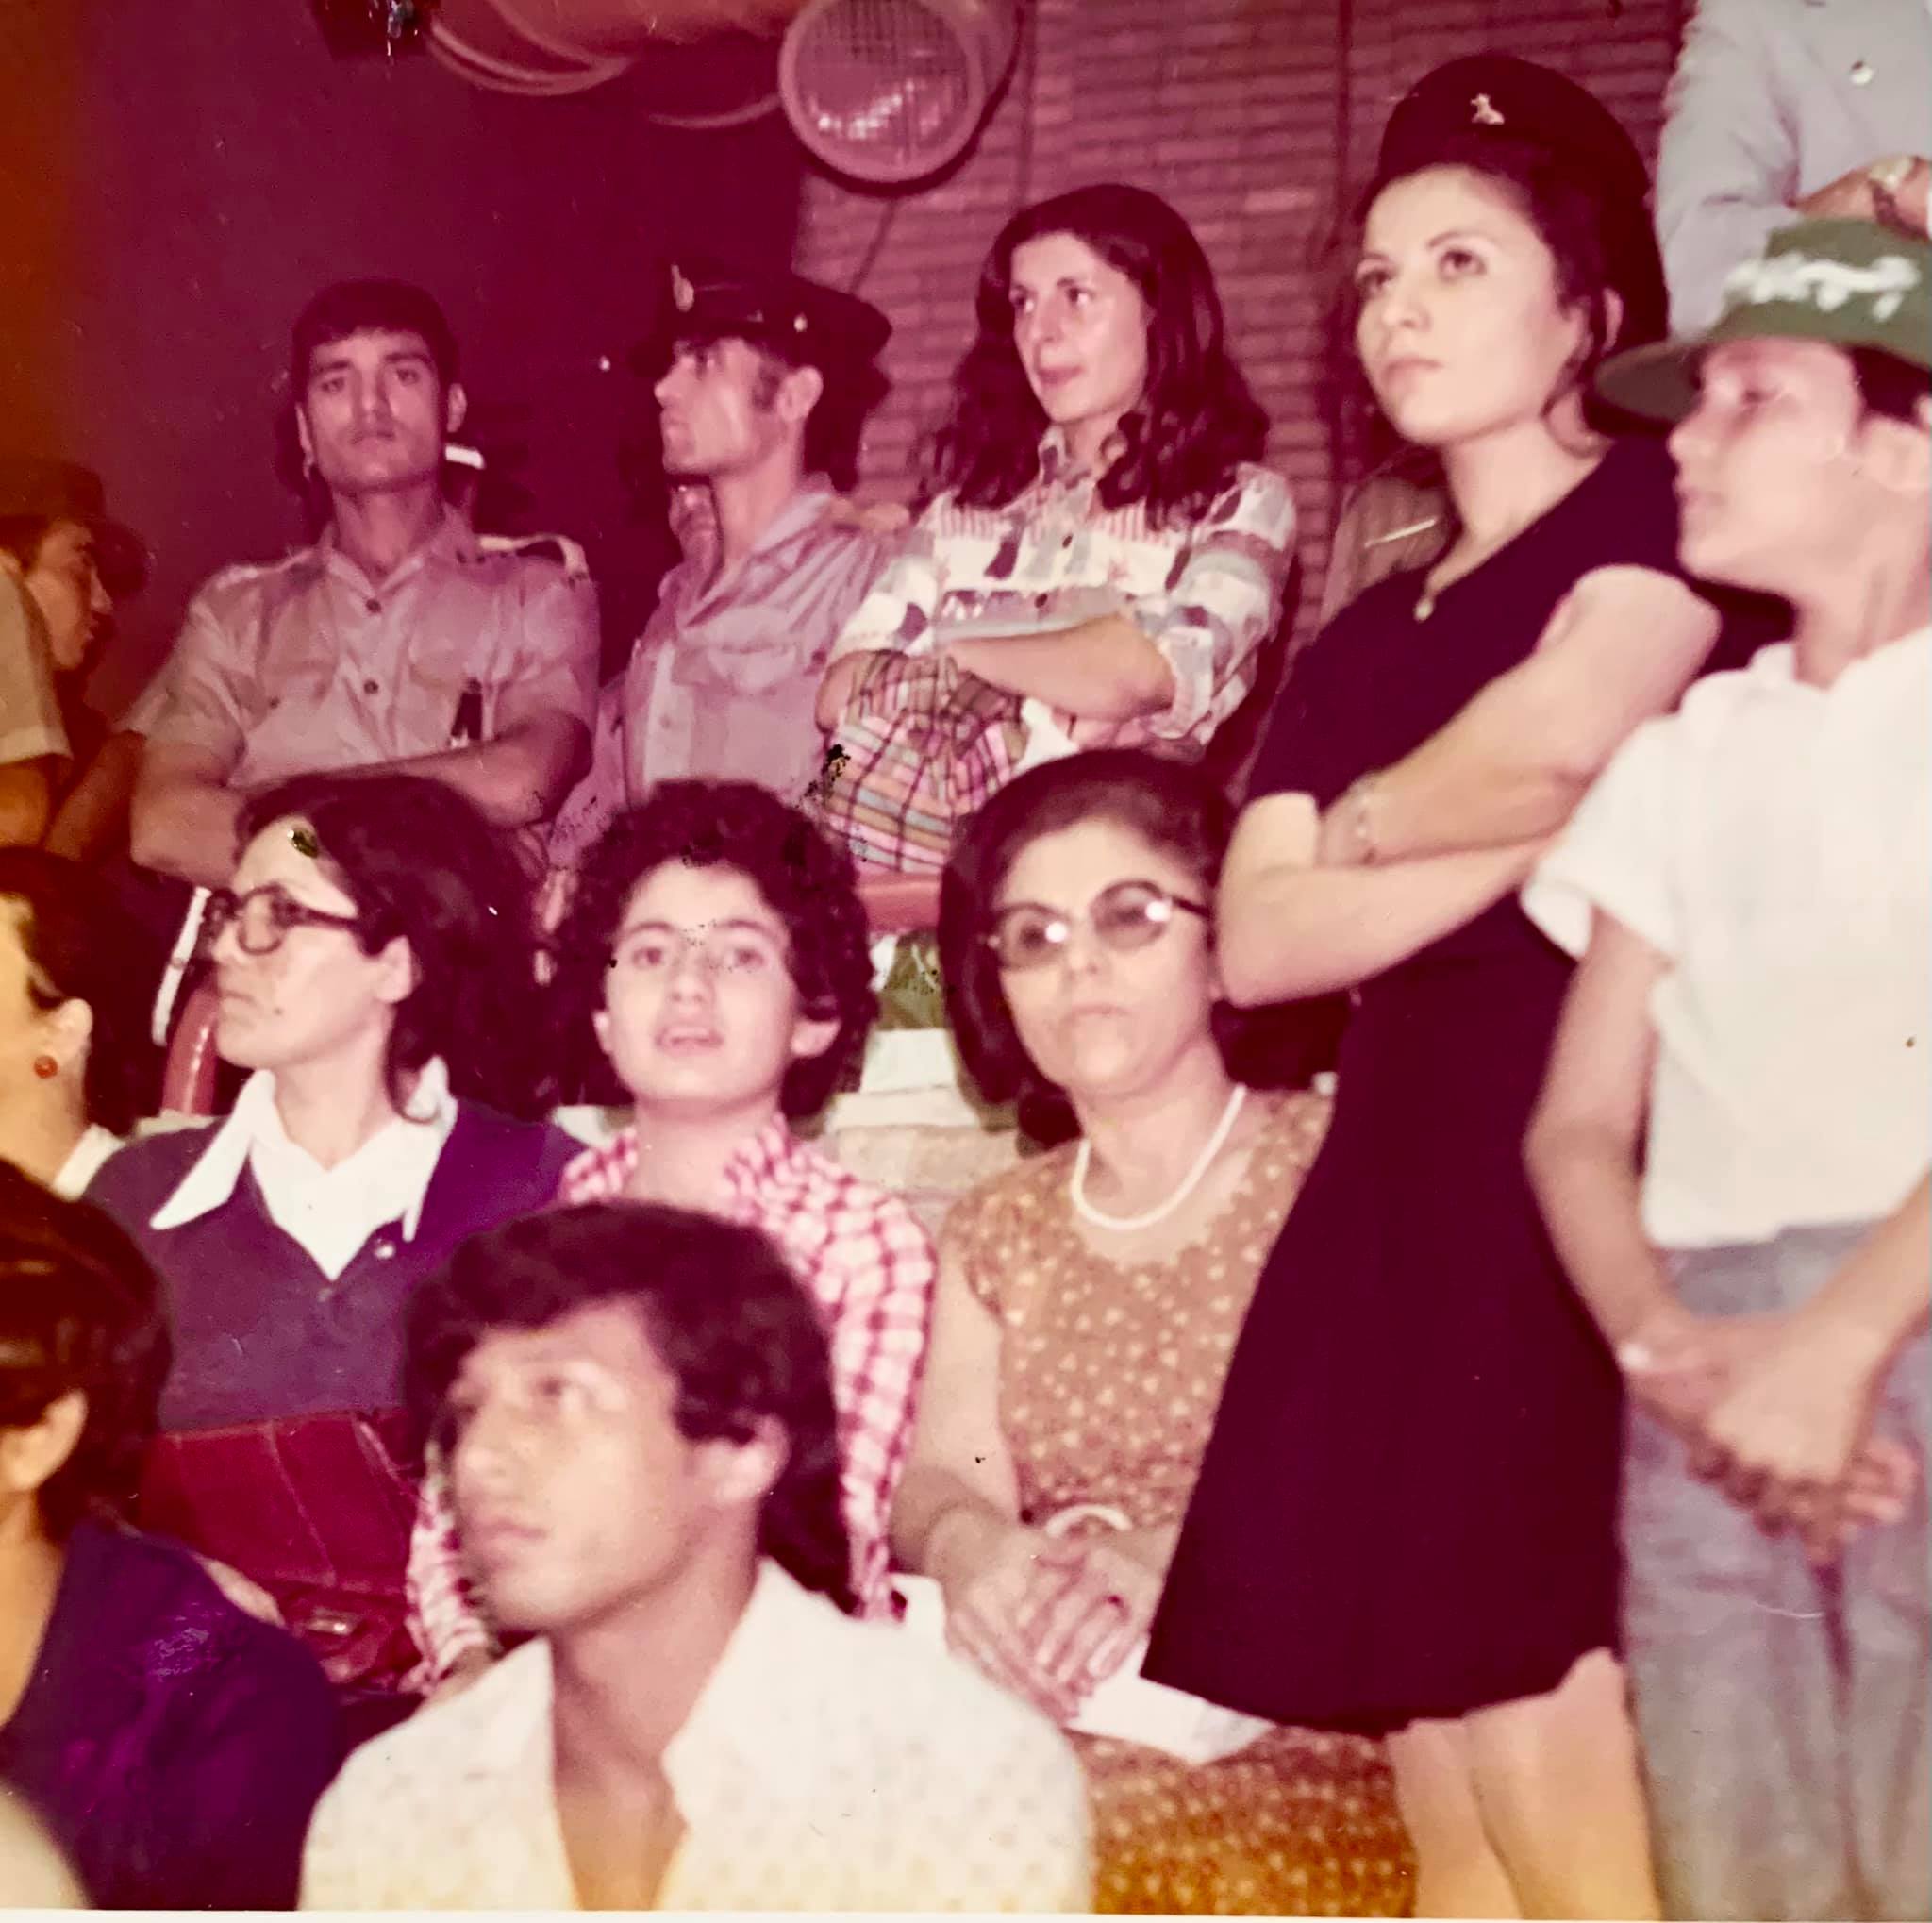 Throwback Thursday: With my family, at an event of the 1974 Asian Games in Tehran